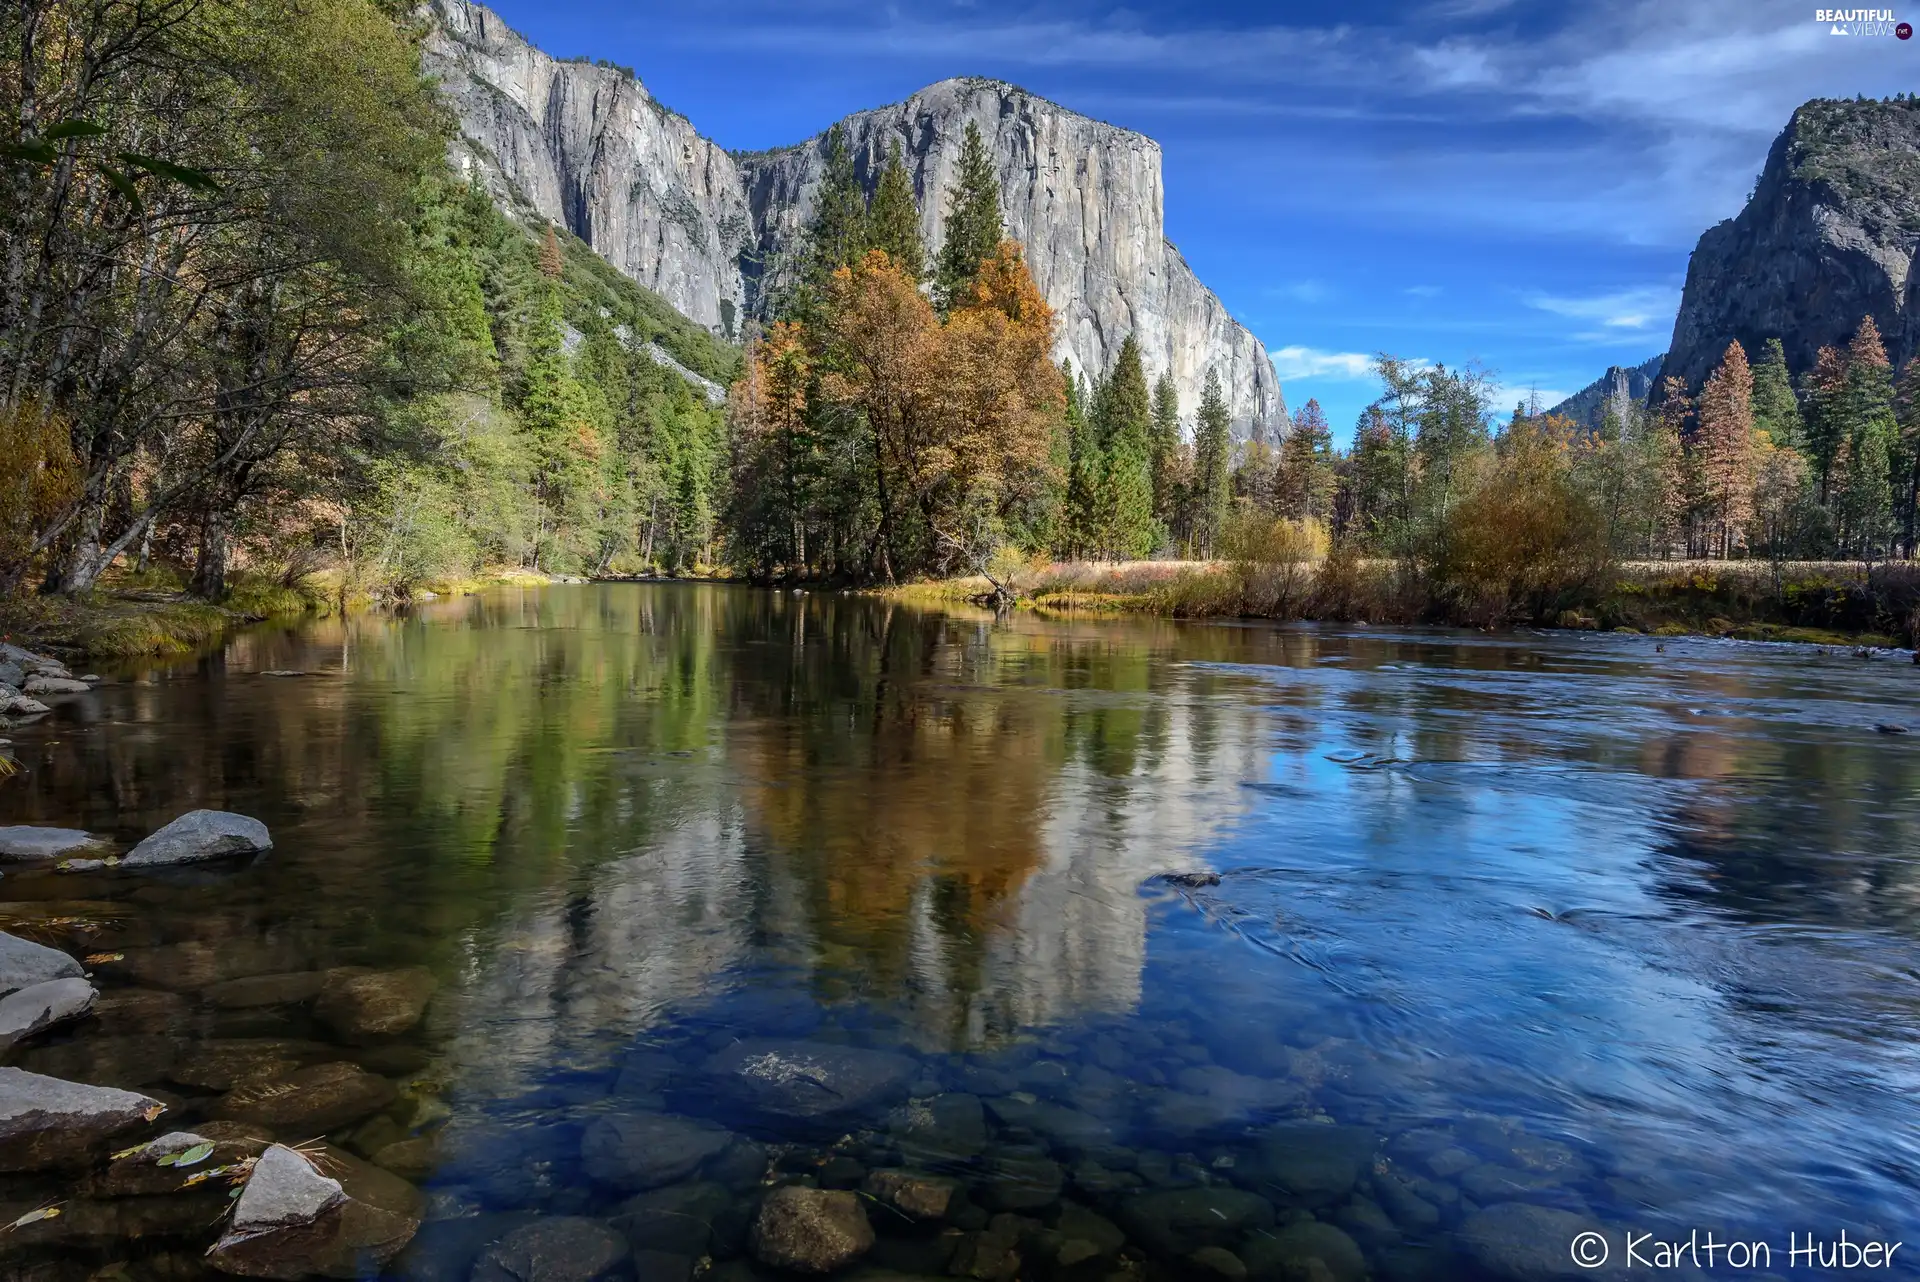 Mountains, California, forest, Yosemite National Park, The United States, El Capitan, Merced River